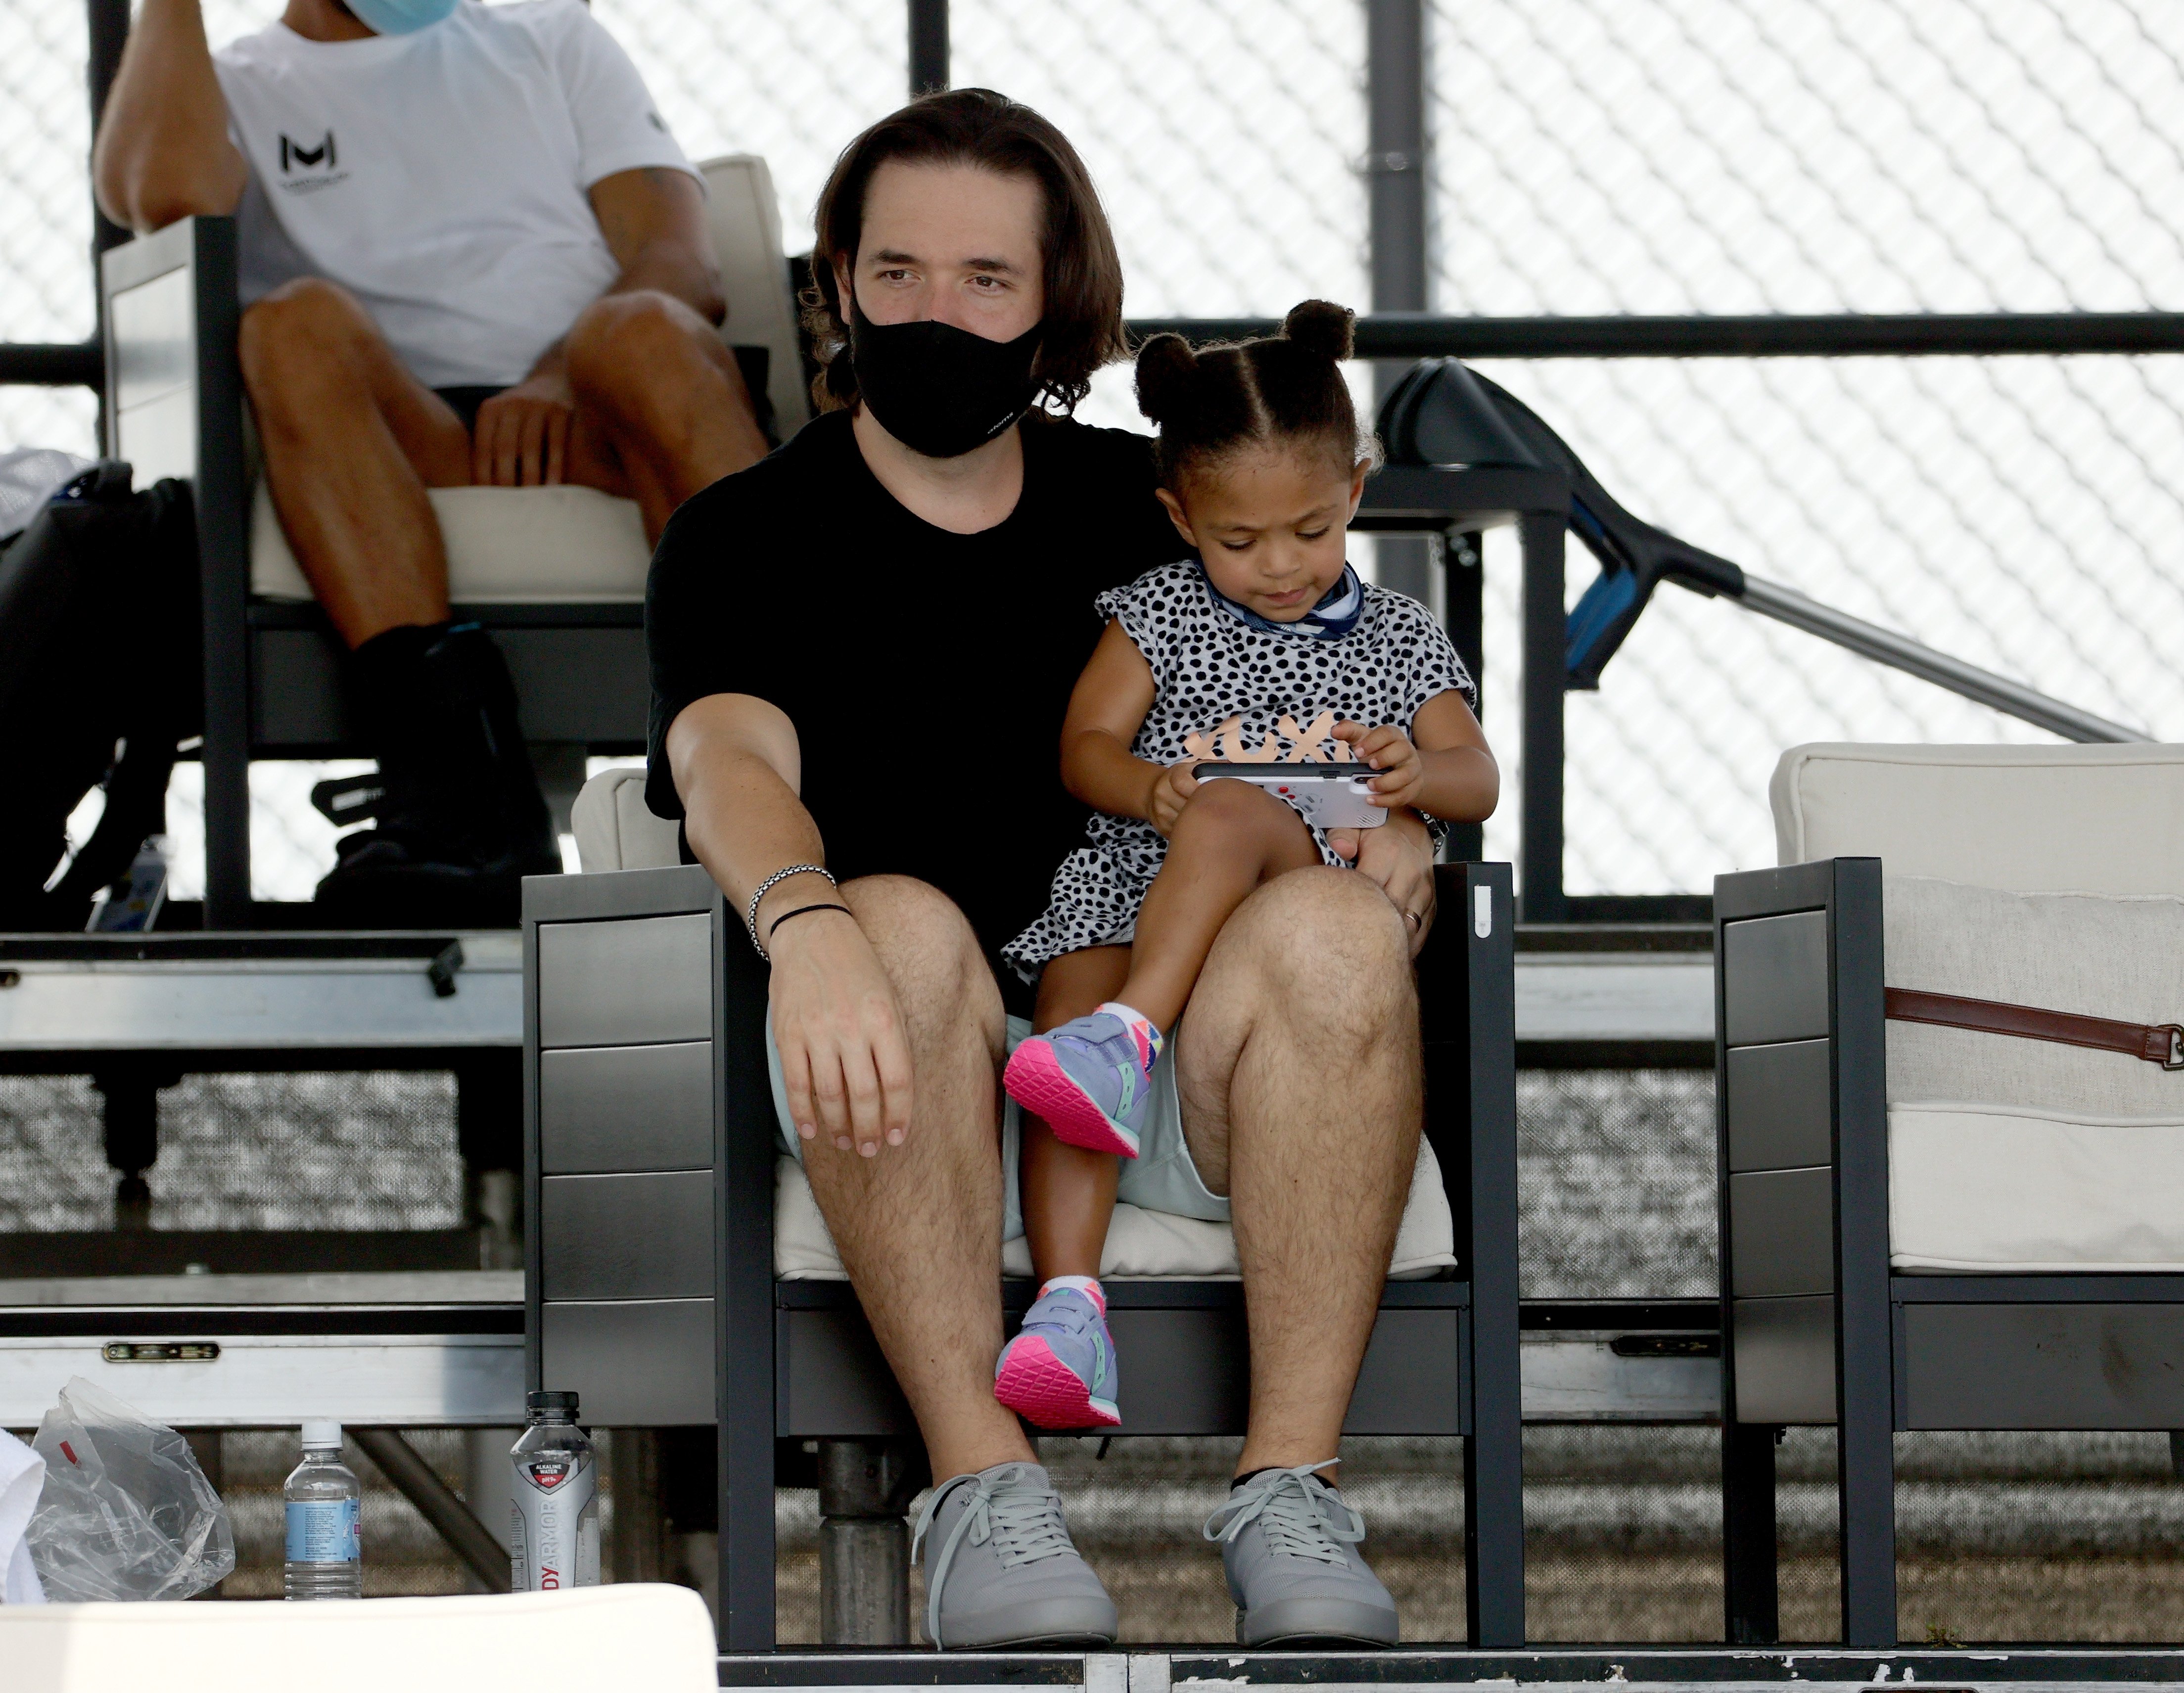 Serena Williams' husband, Alexis Ohanian, and daughter, Alexis Olympia Ohanian at the Top Seed Tennis Club on August 11, 2020 in Kentucky. | Photo: Getty Images